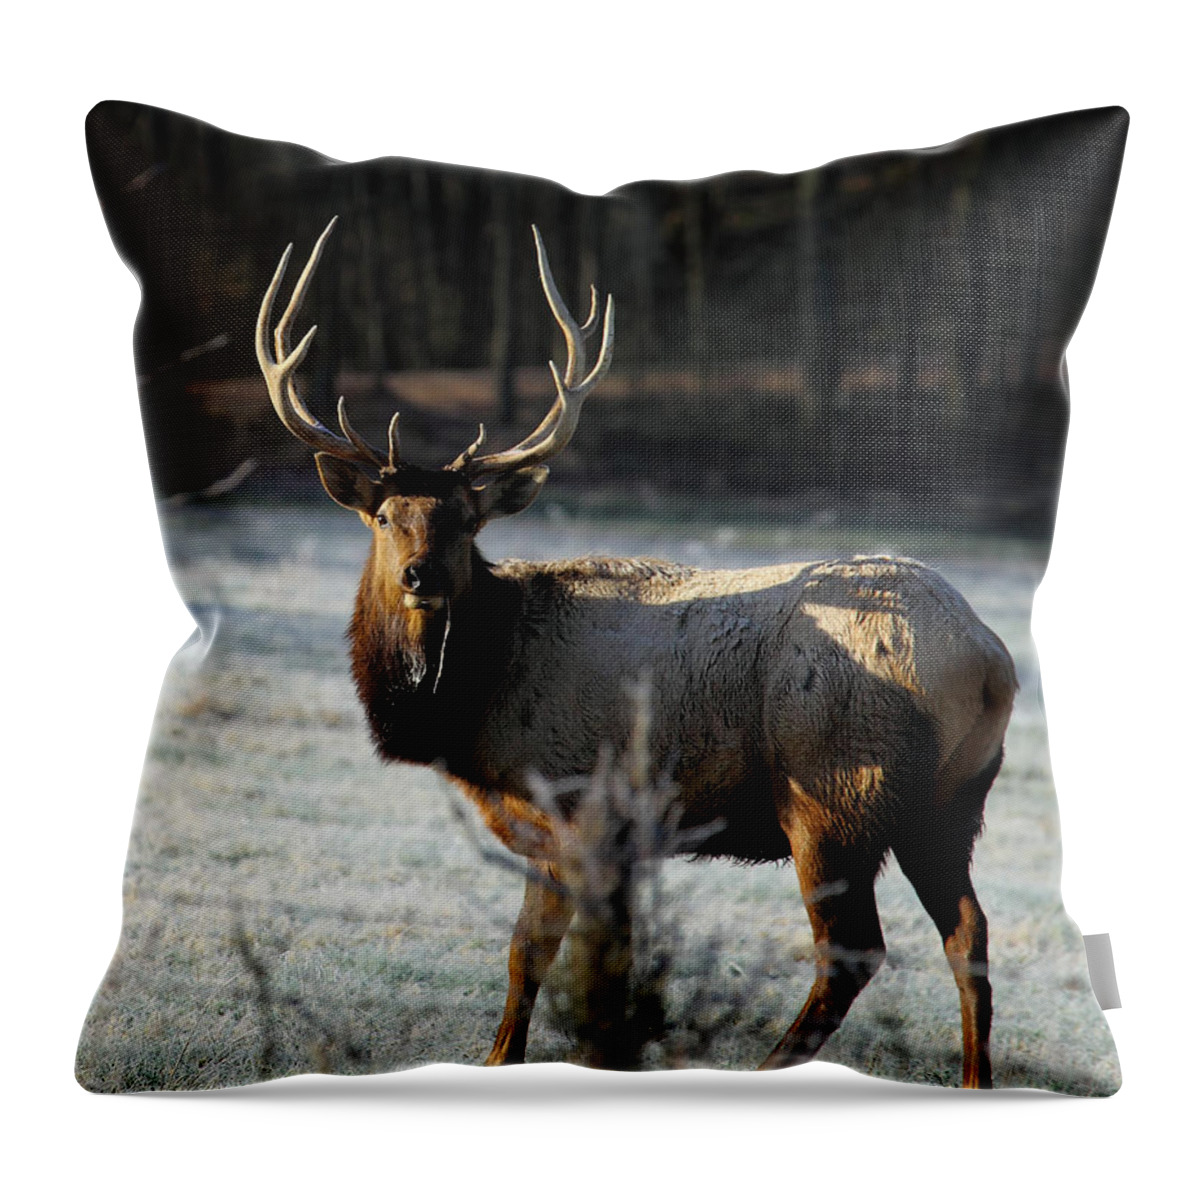 Bull Elk Throw Pillow featuring the photograph Bull Elk in Frosty Field by Michael Dougherty